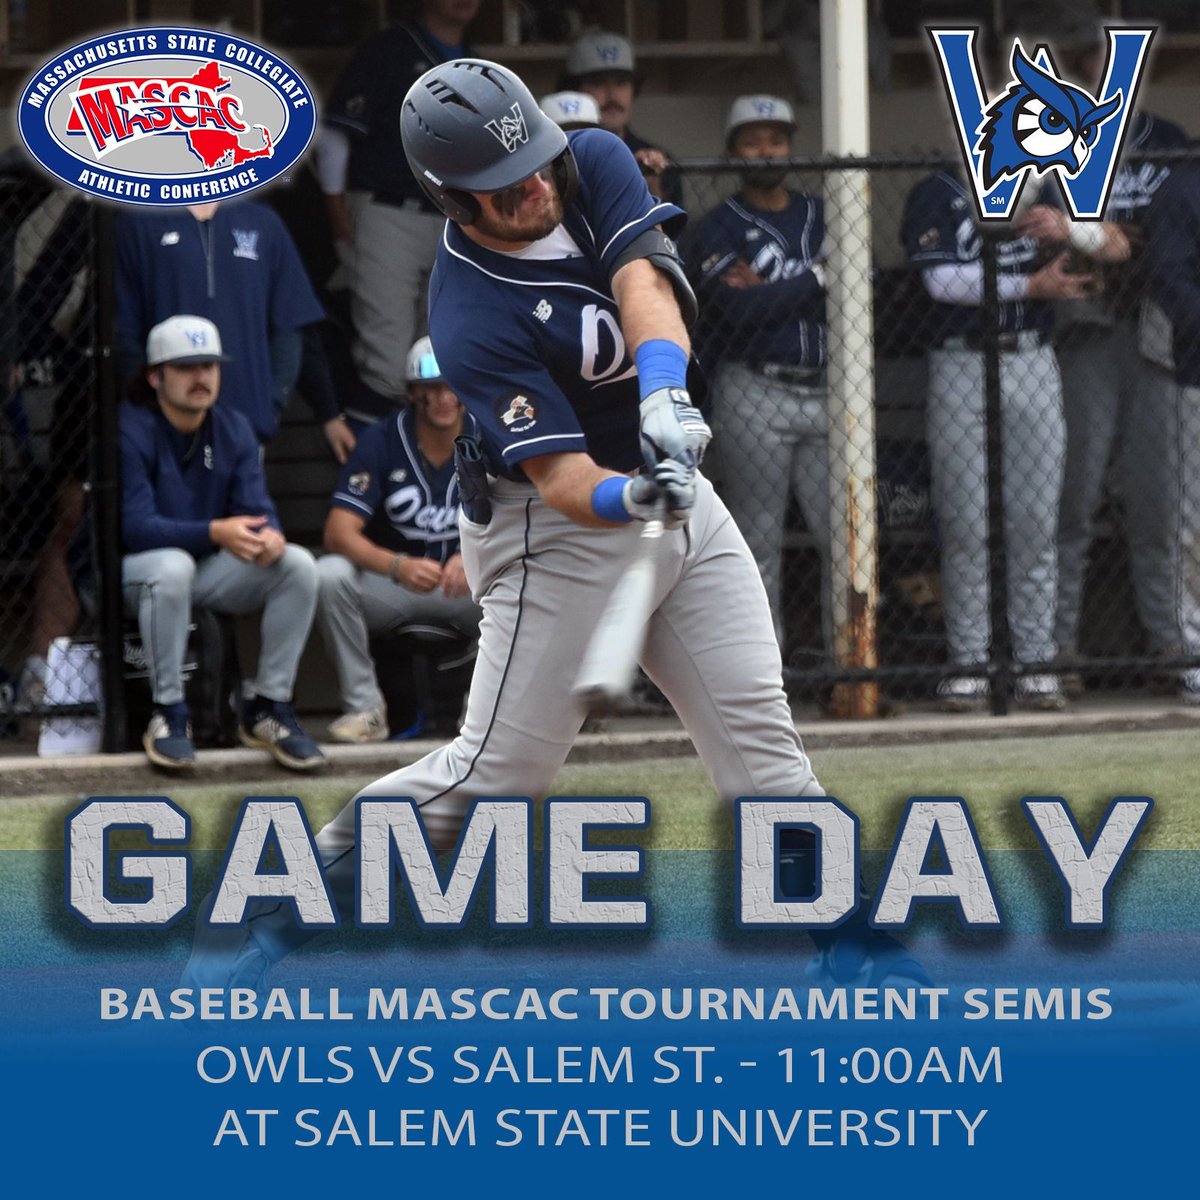 ICYMI: Baseball defeated Worcester State 8-6 yesterday to stay alive and advance into the MASCAC Semifinals where the Owls will face Salem with a trip to the league championship game on the line! Video and live stats at WestfieldStateOwls.com #LetsGoOwls #d3baseball